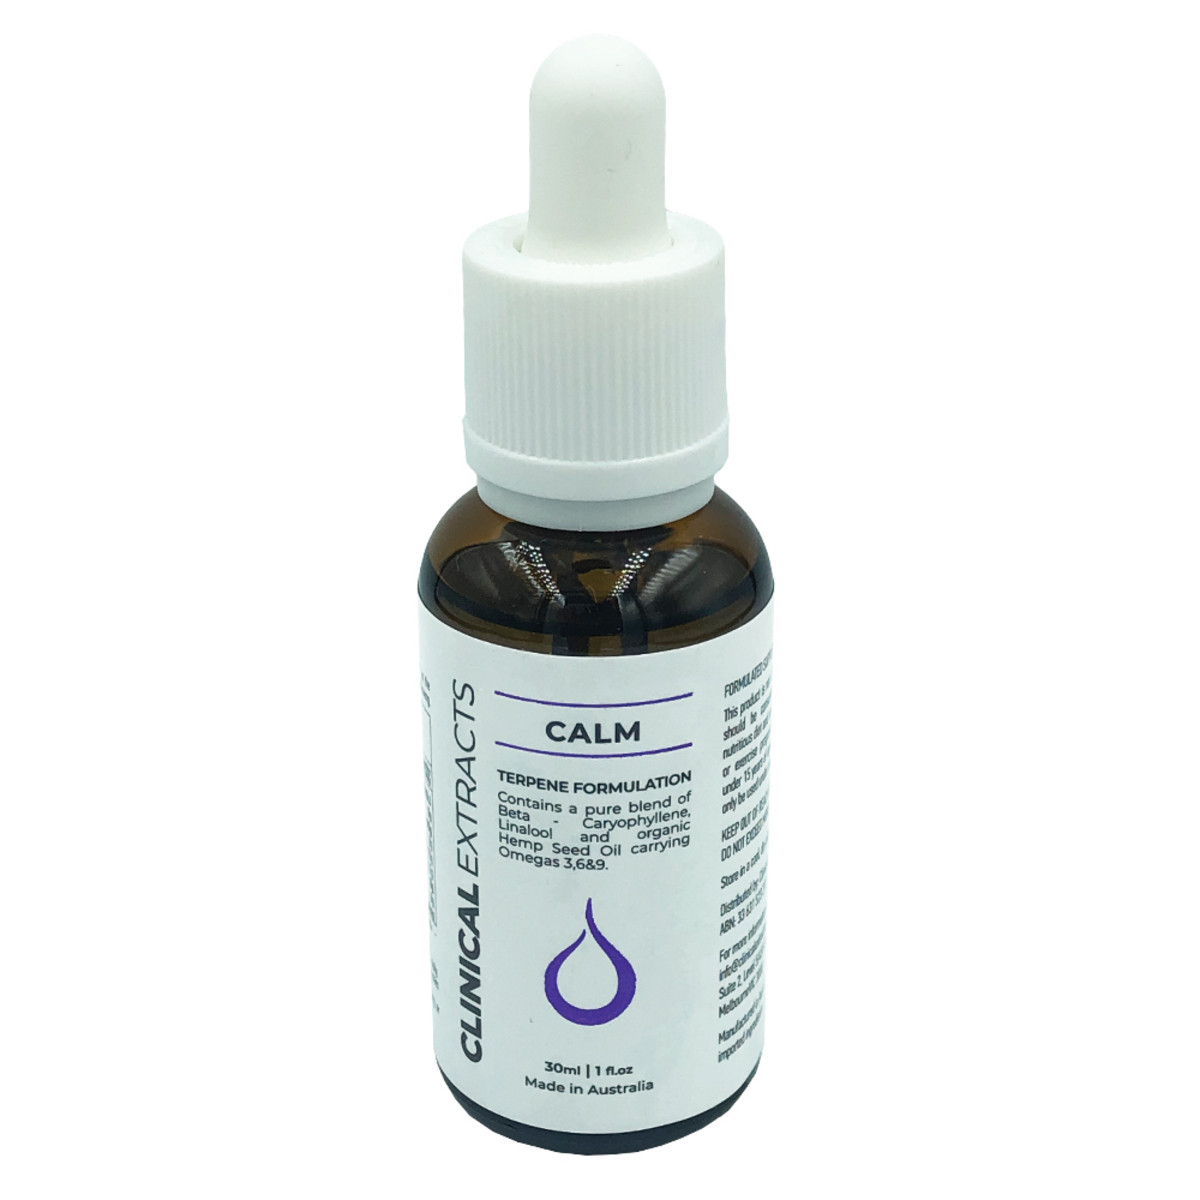 CLINICAL EXTRACTS - Terpene Formulation Calm 30ml